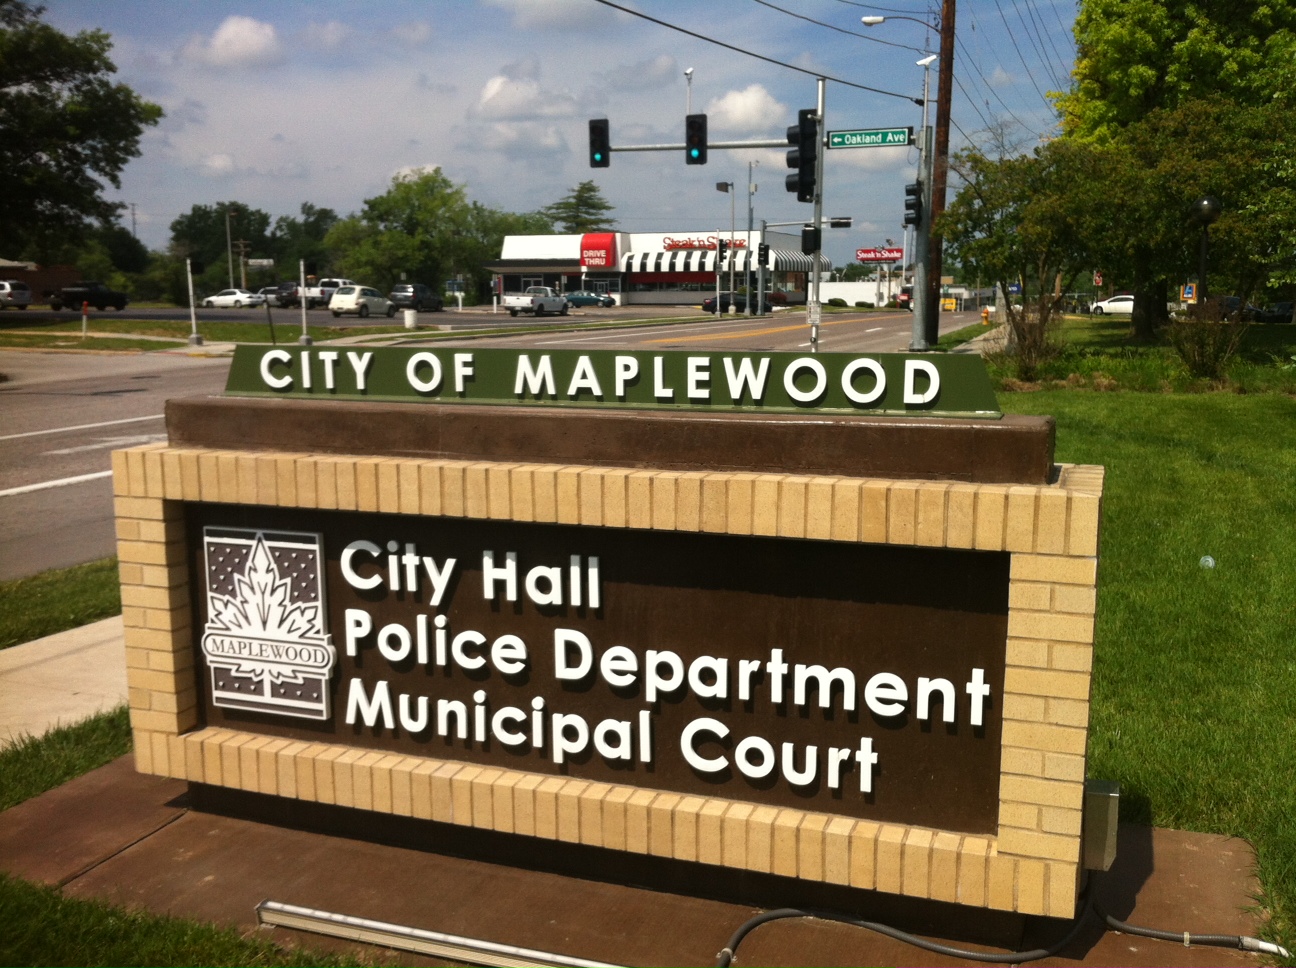 Maplewood council discusses how to spend more than $1 million, bills passed